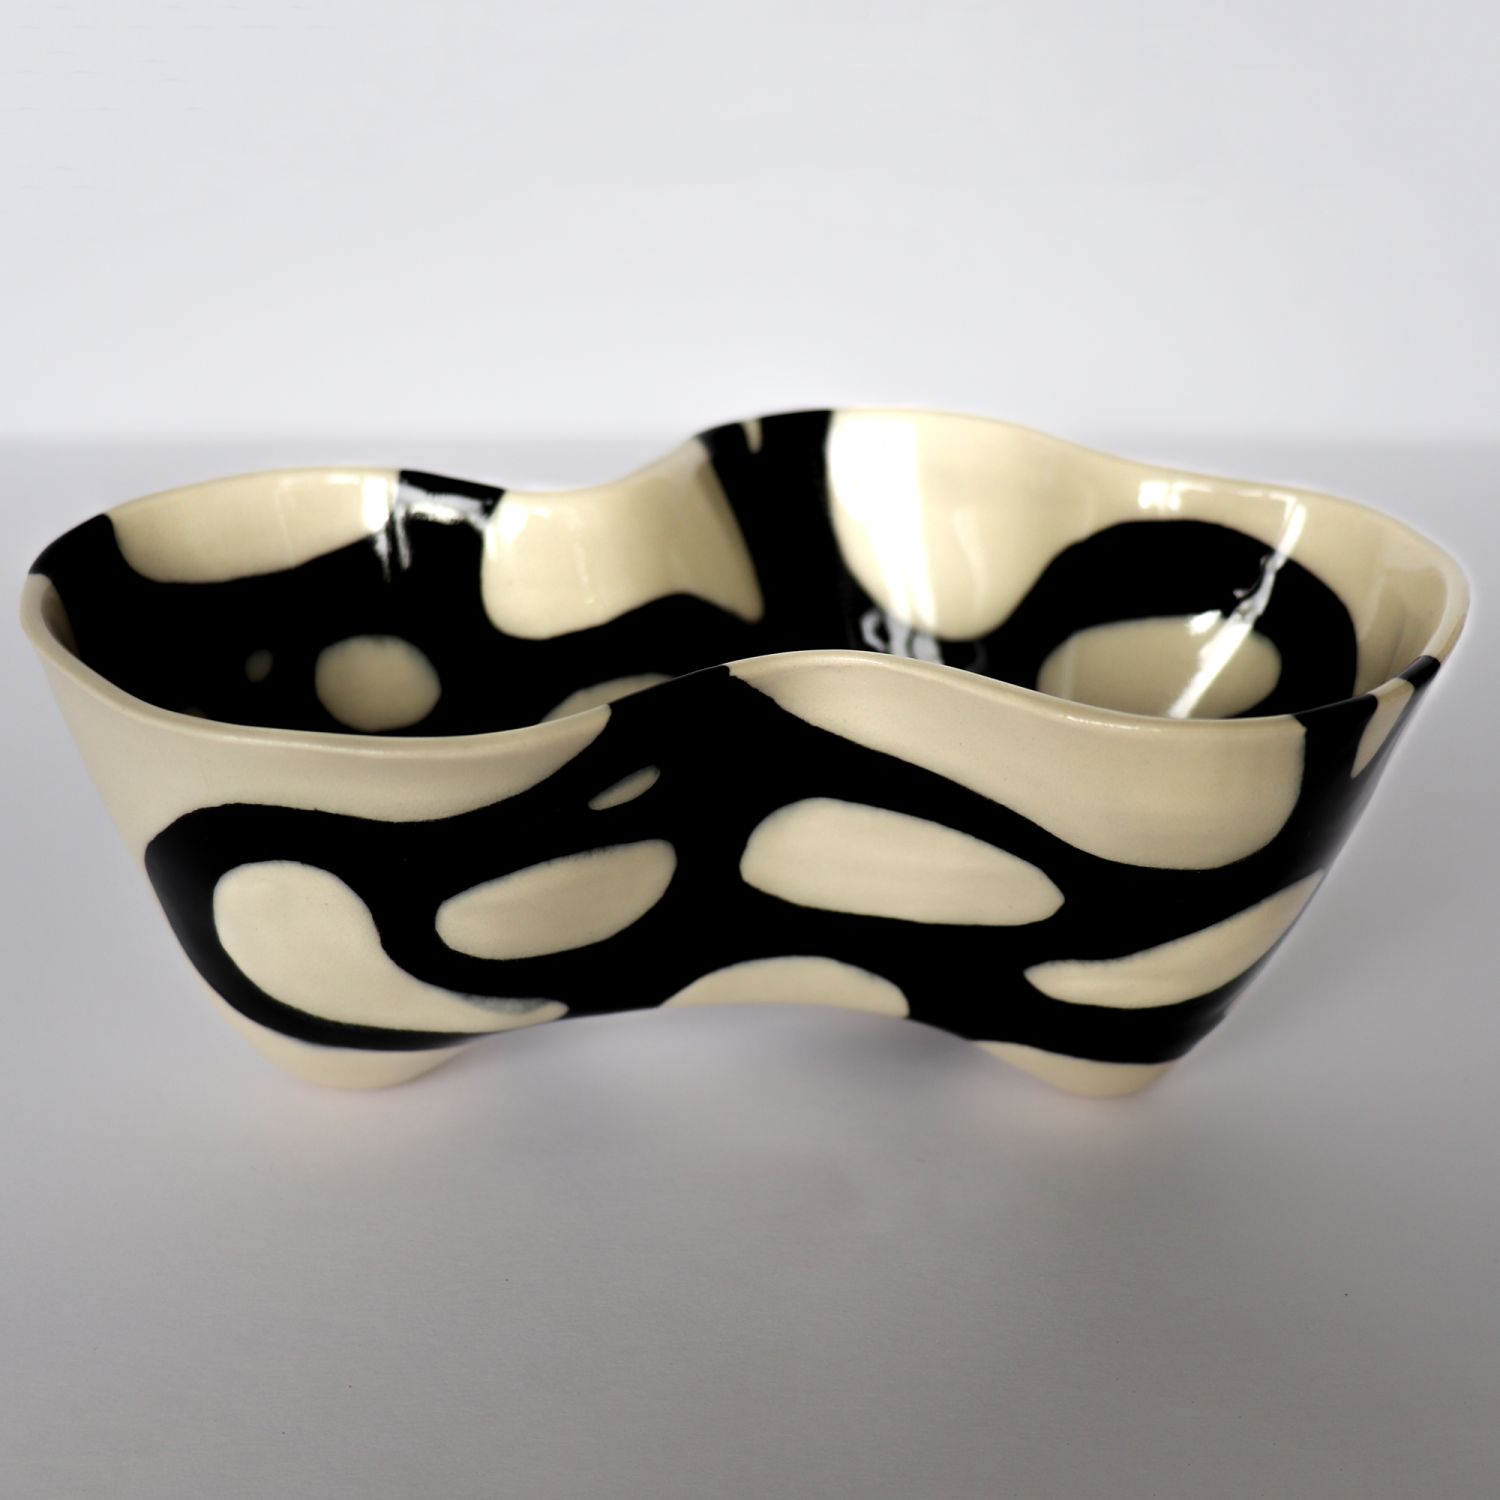 Alana Marcoccia: Interconnected Sculptural Bowl Product Image 13 of 13